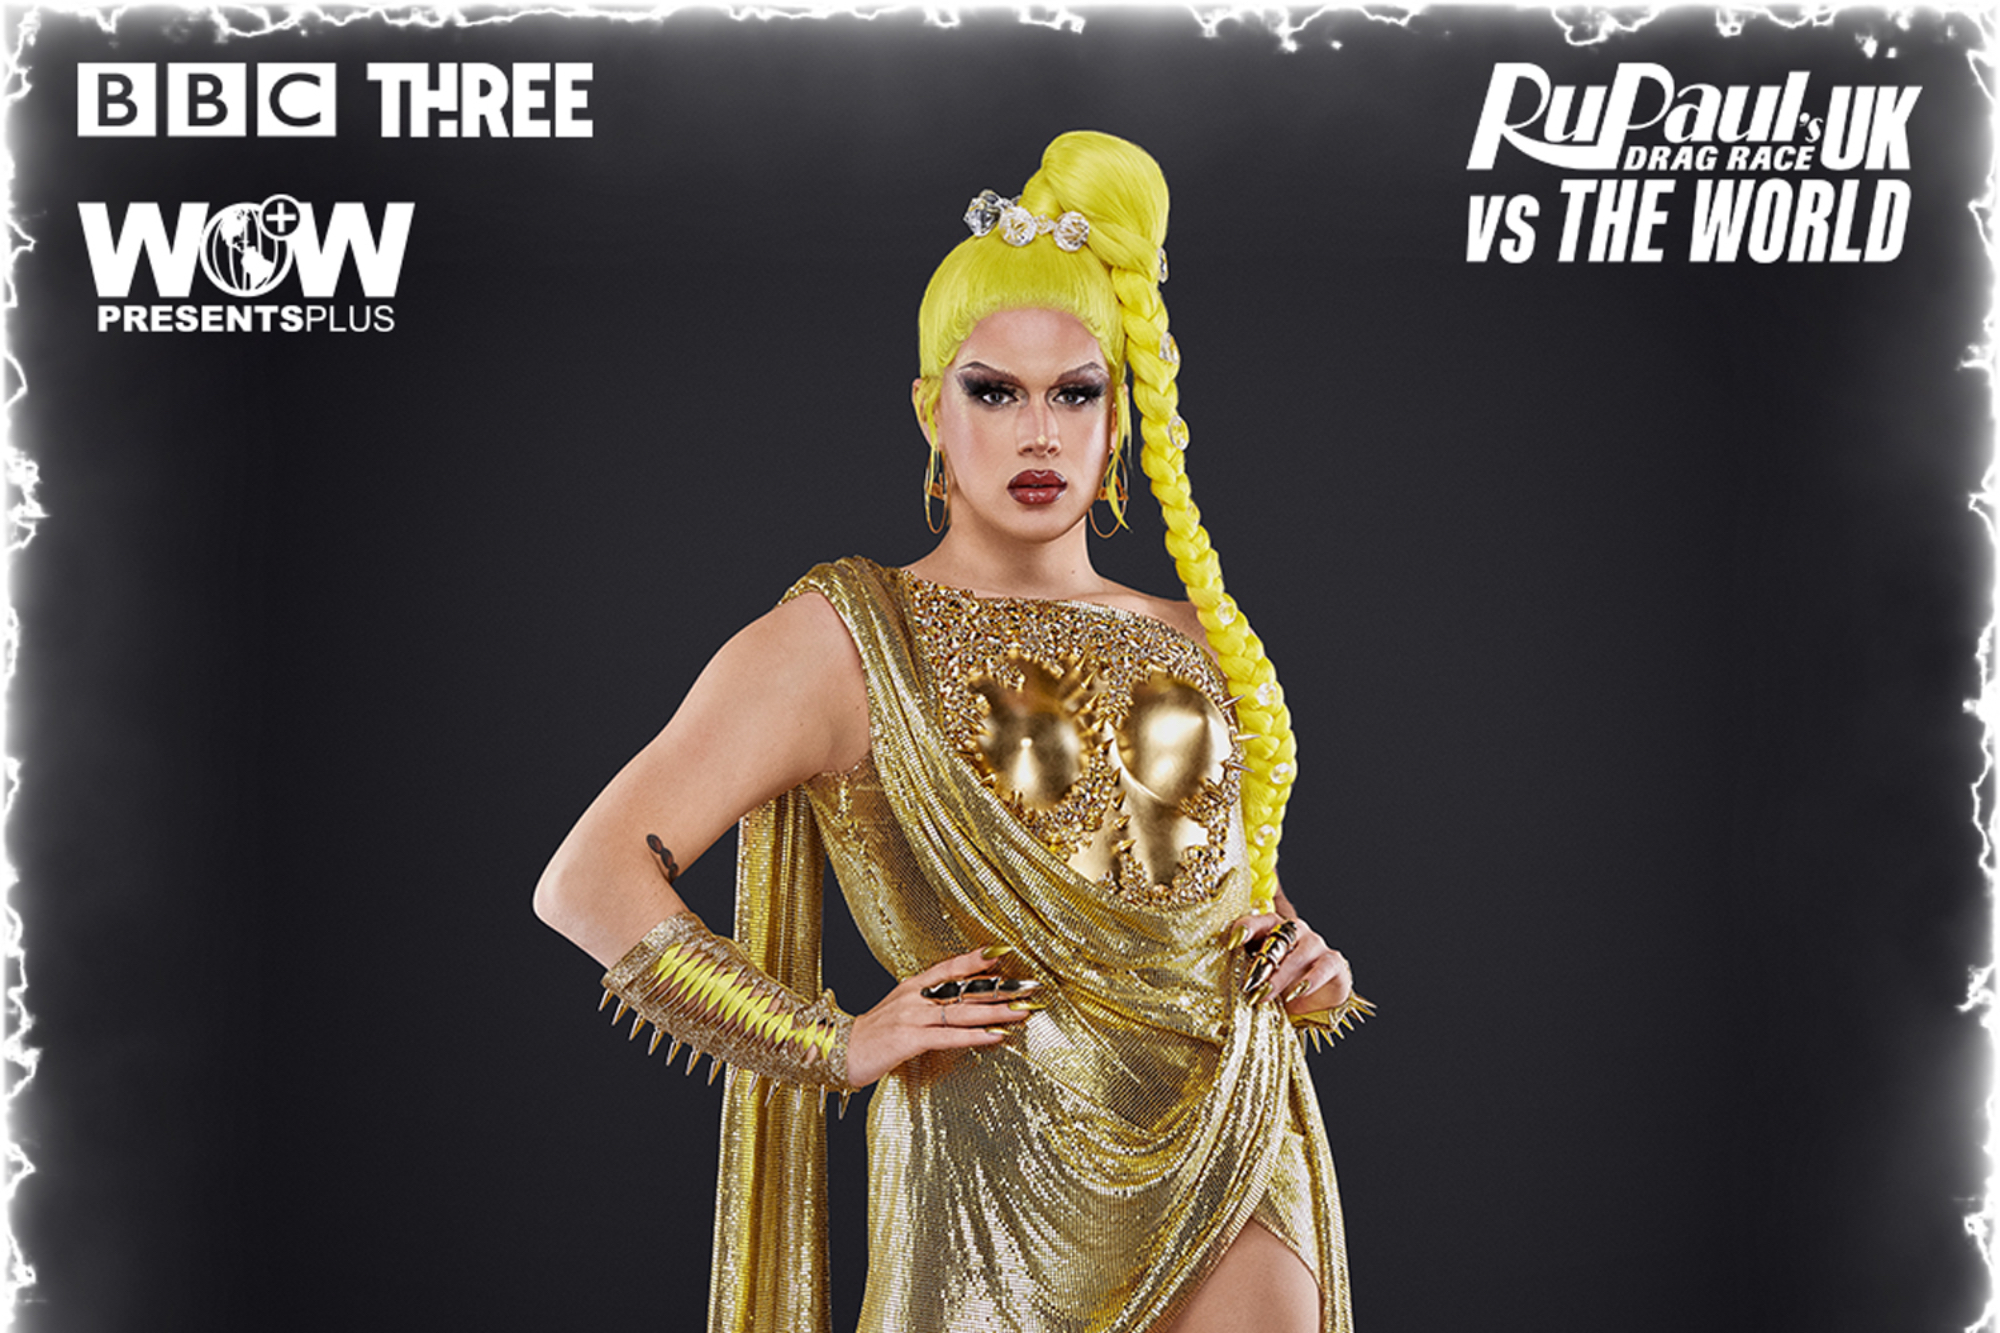 'RuPaul's Drag Race UK vs The World' Lemon wearing yellow and gold in promo image